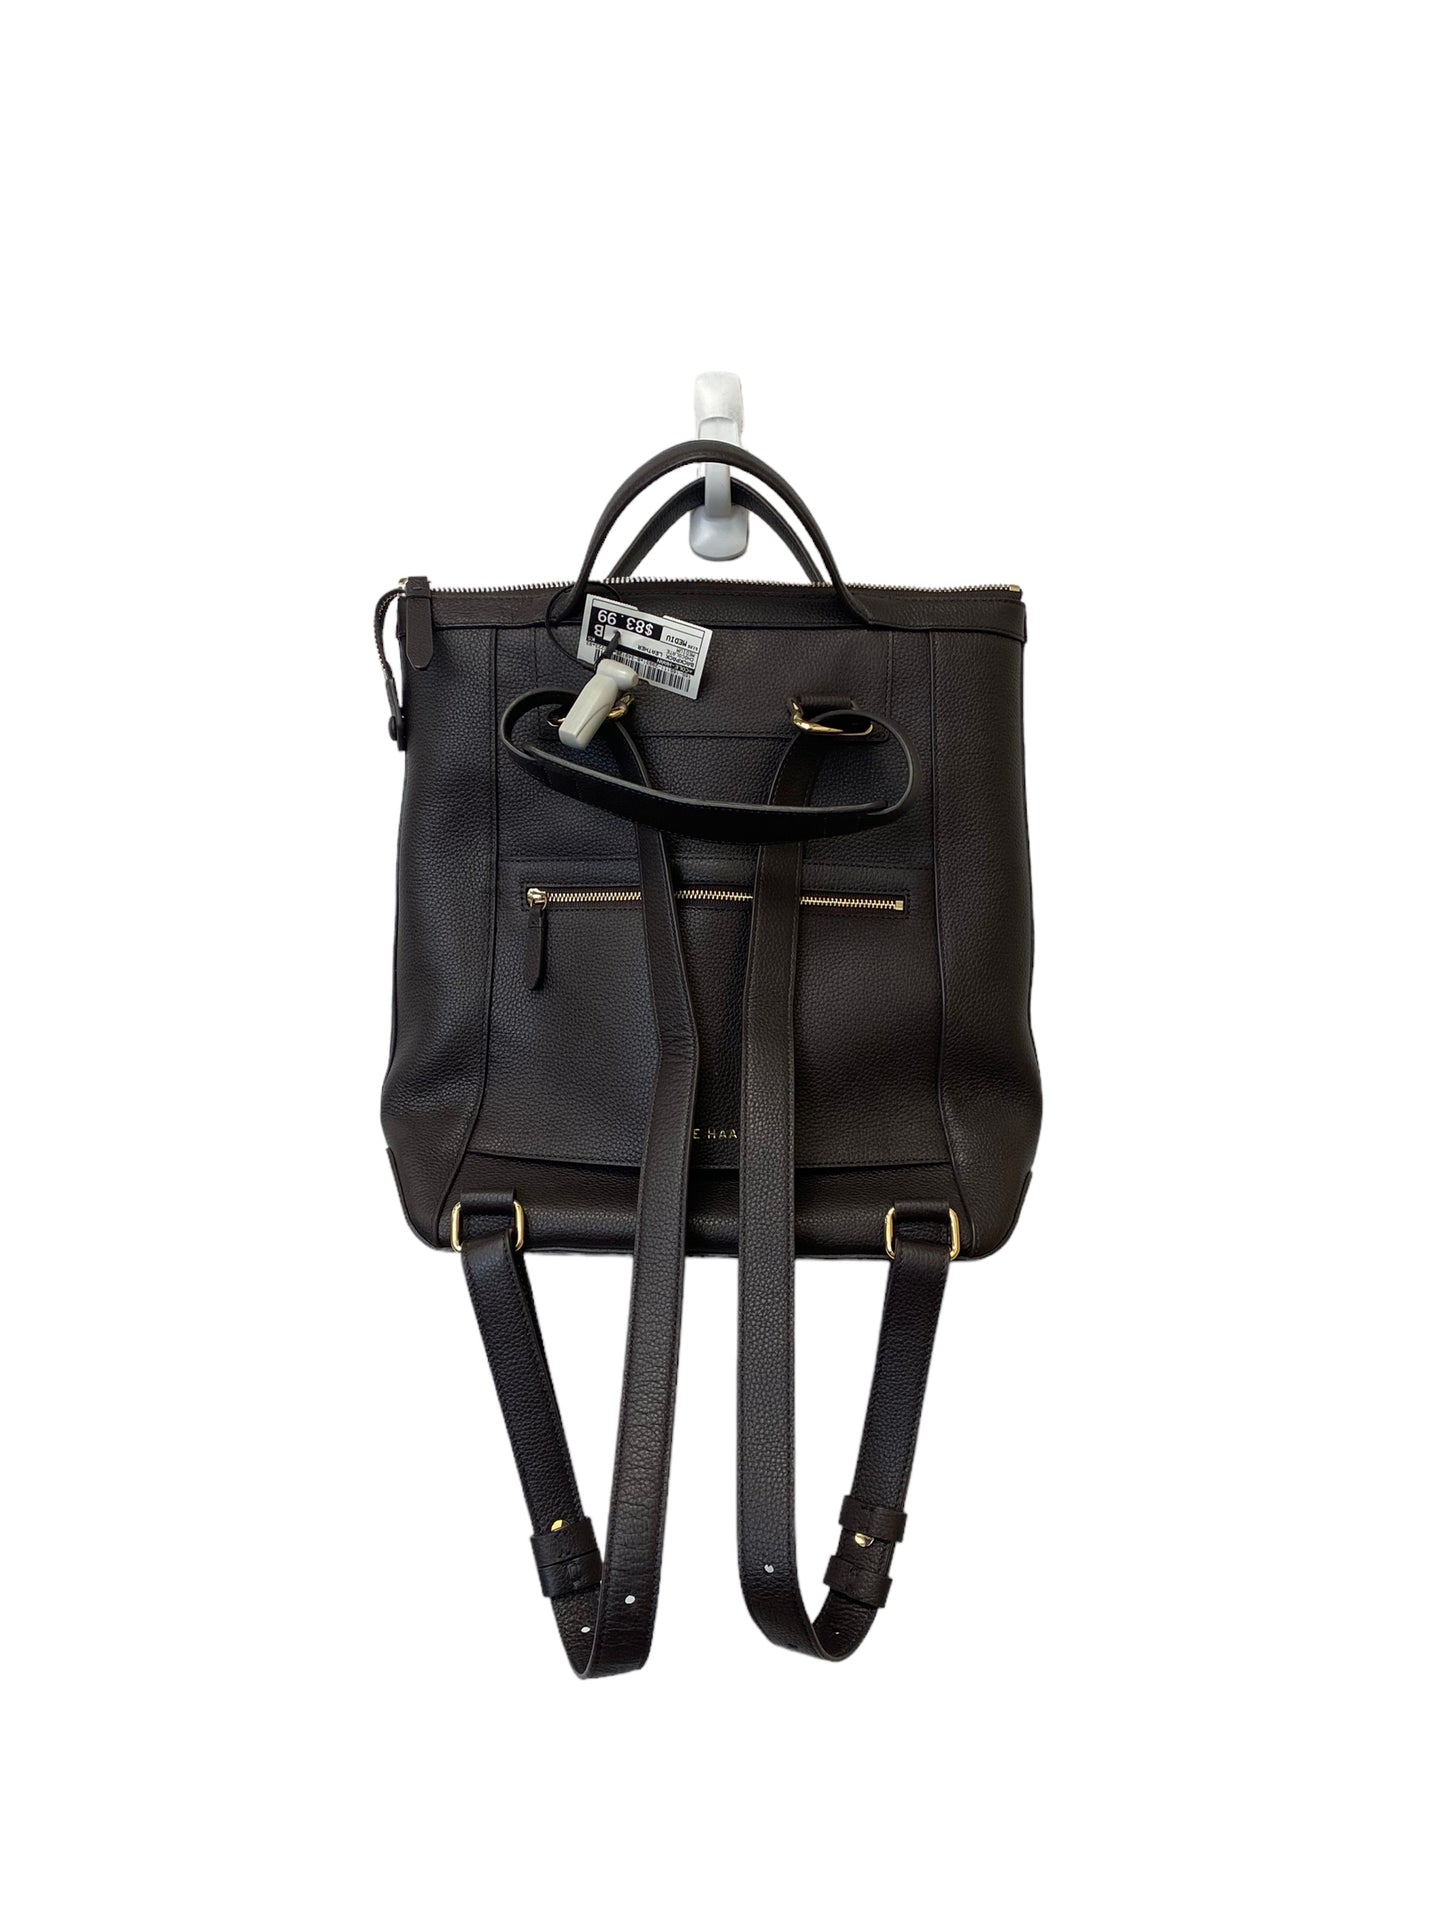 Backpack Leather By Cole-haan  Size: Medium